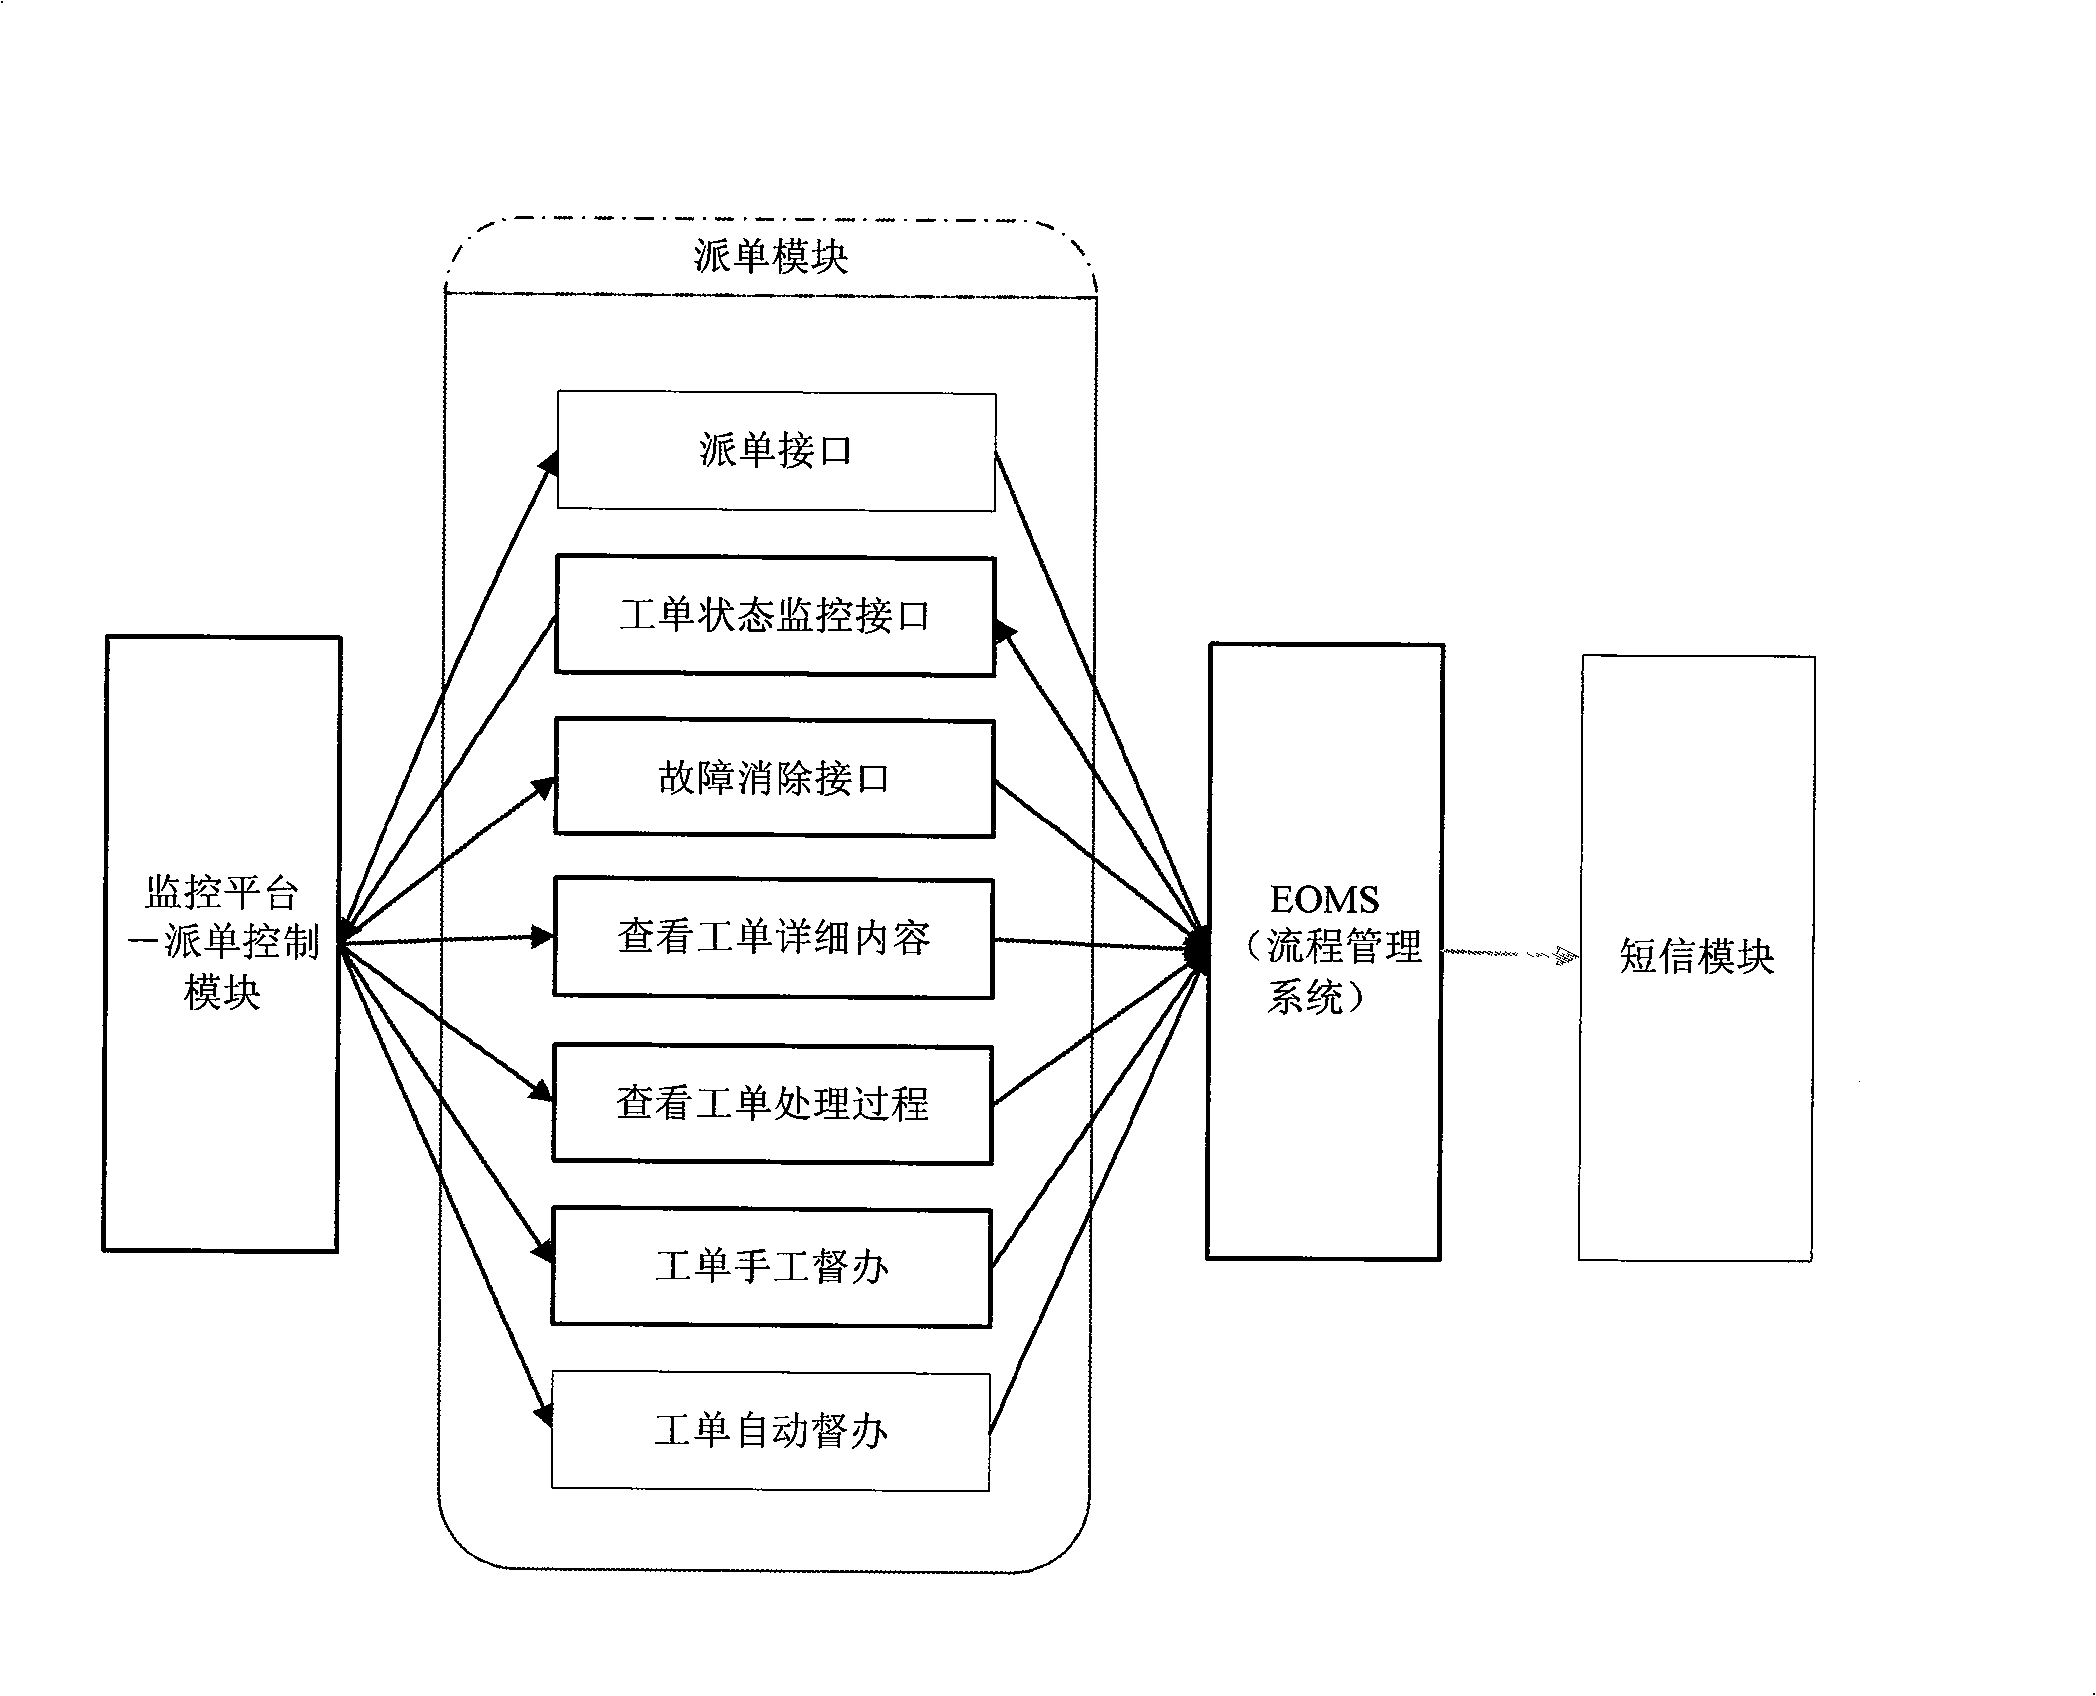 Method for monitoring fault ticket in mobile communication network management system